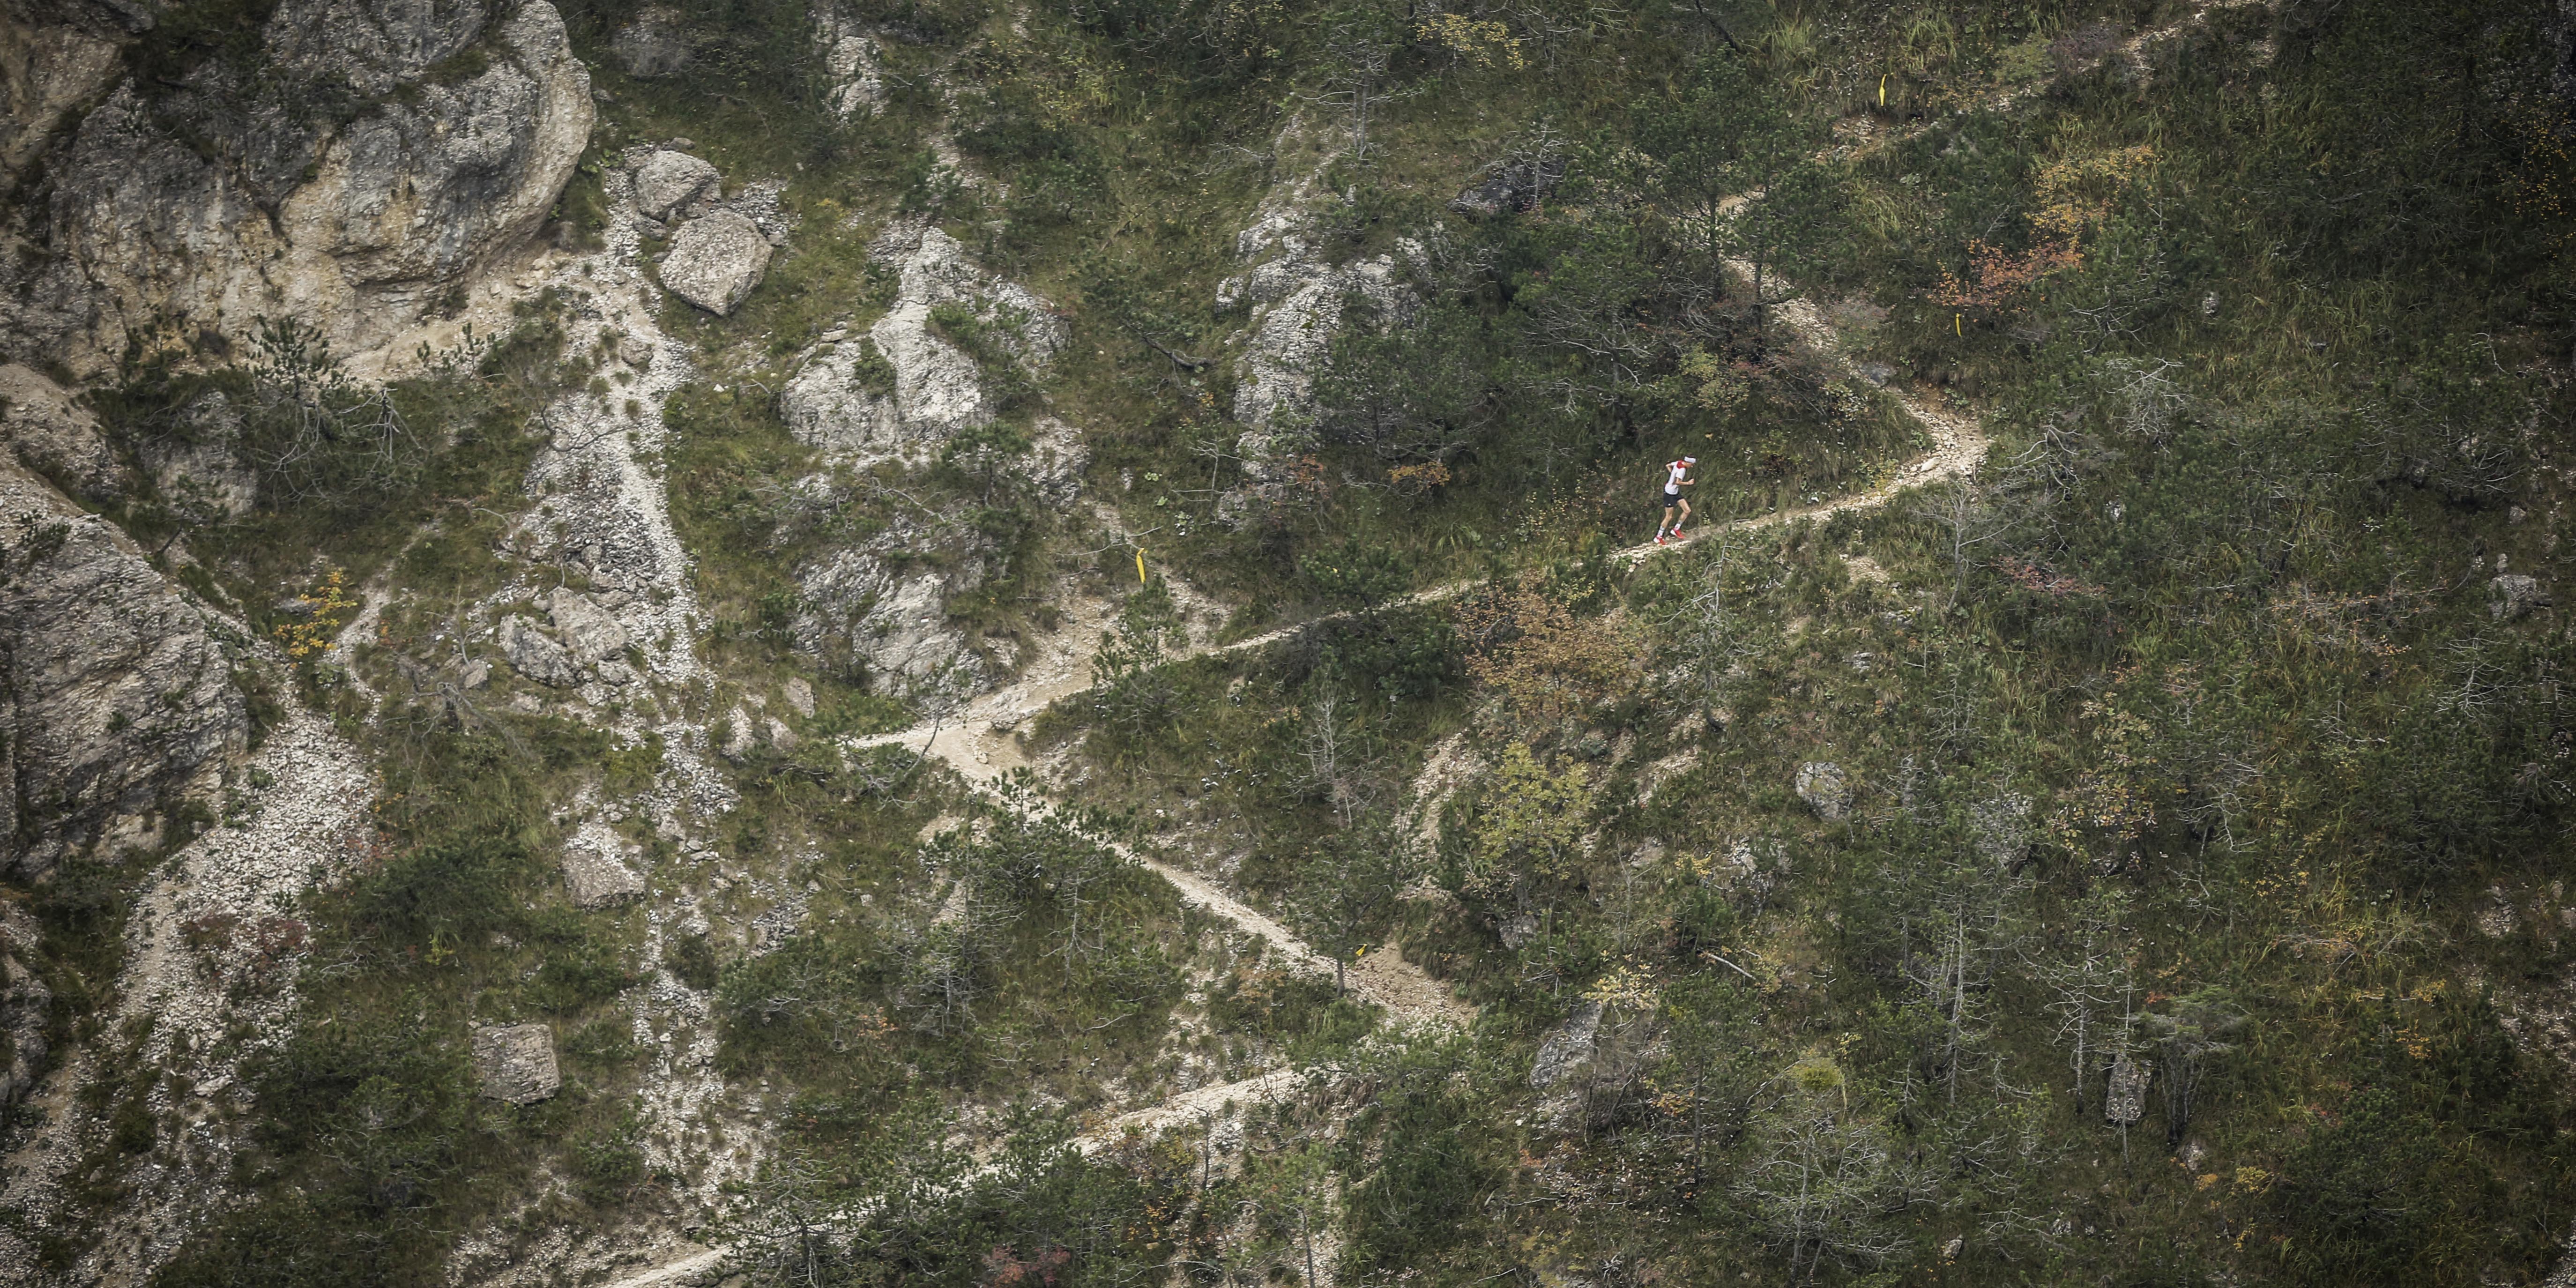 The steep technical course of the Limone Extreme. (c)iancorless.com